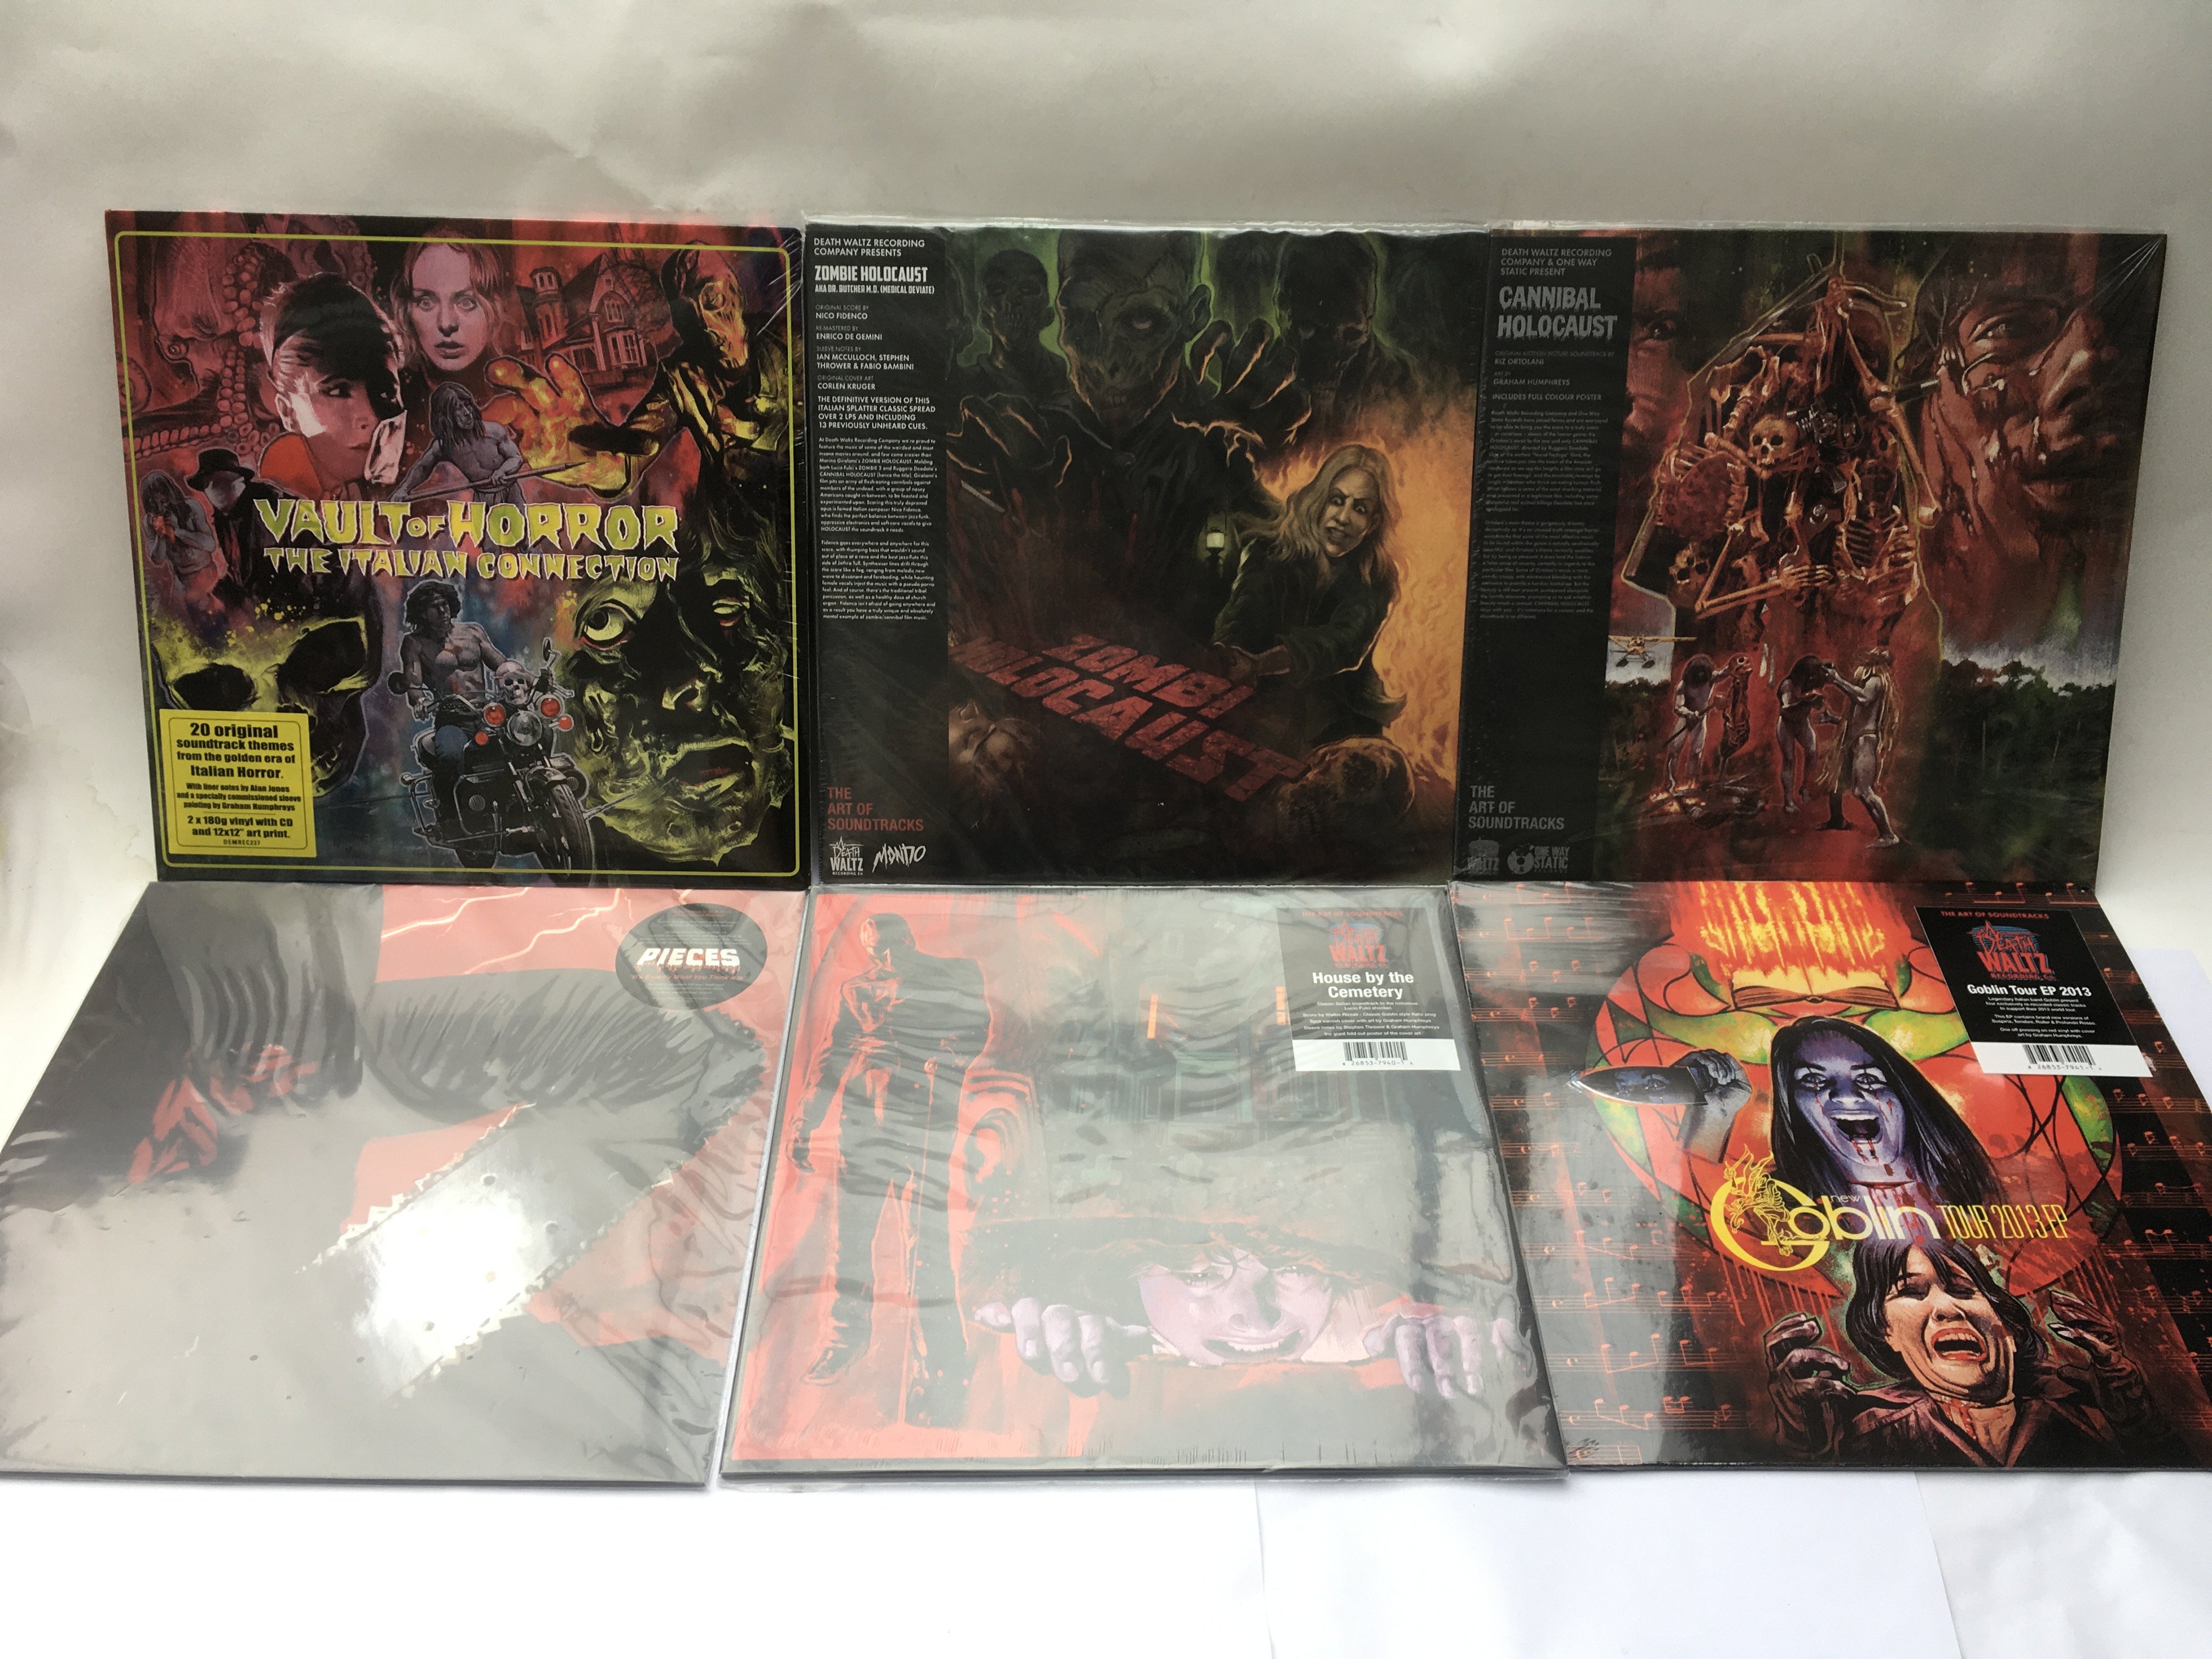 Six sealed and mint 180g soundtrack LPs comprising